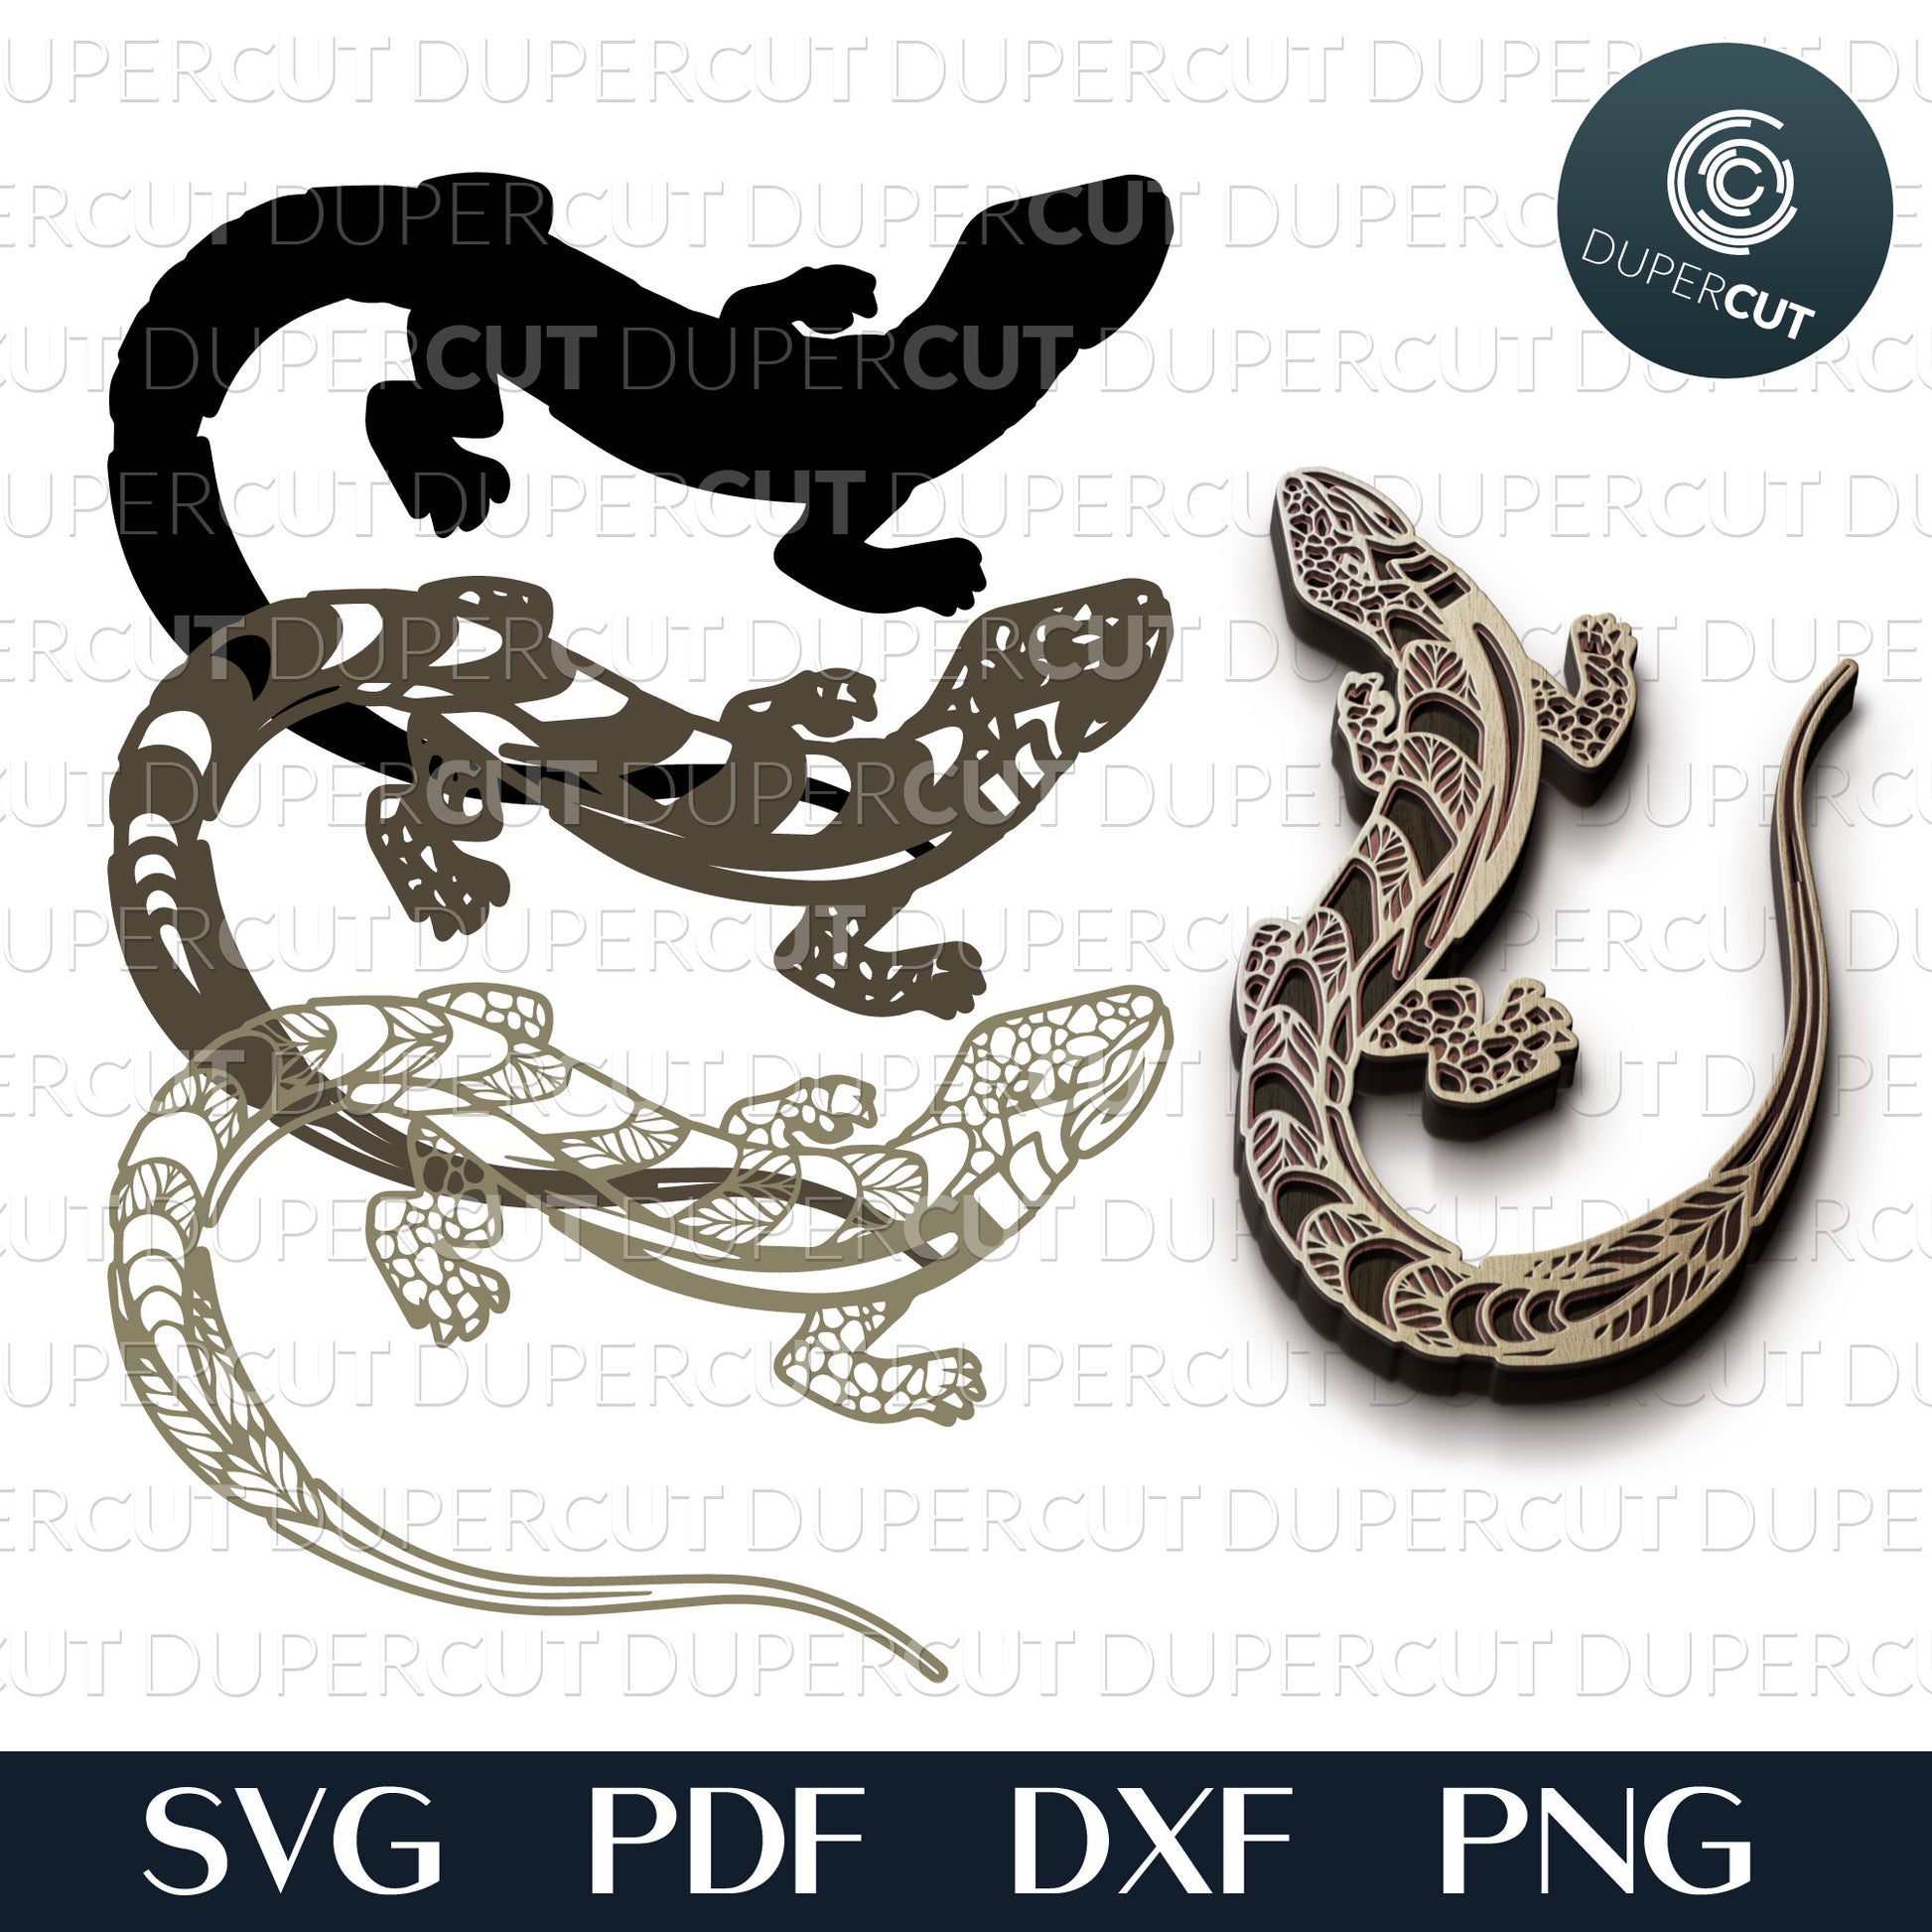 Gecko lizard layered cutting files, SVG PNG DXF files for paper art, laser engraving, scrapbooking. For use with Cricut, Glowforge, Silhouette, CNC machines.